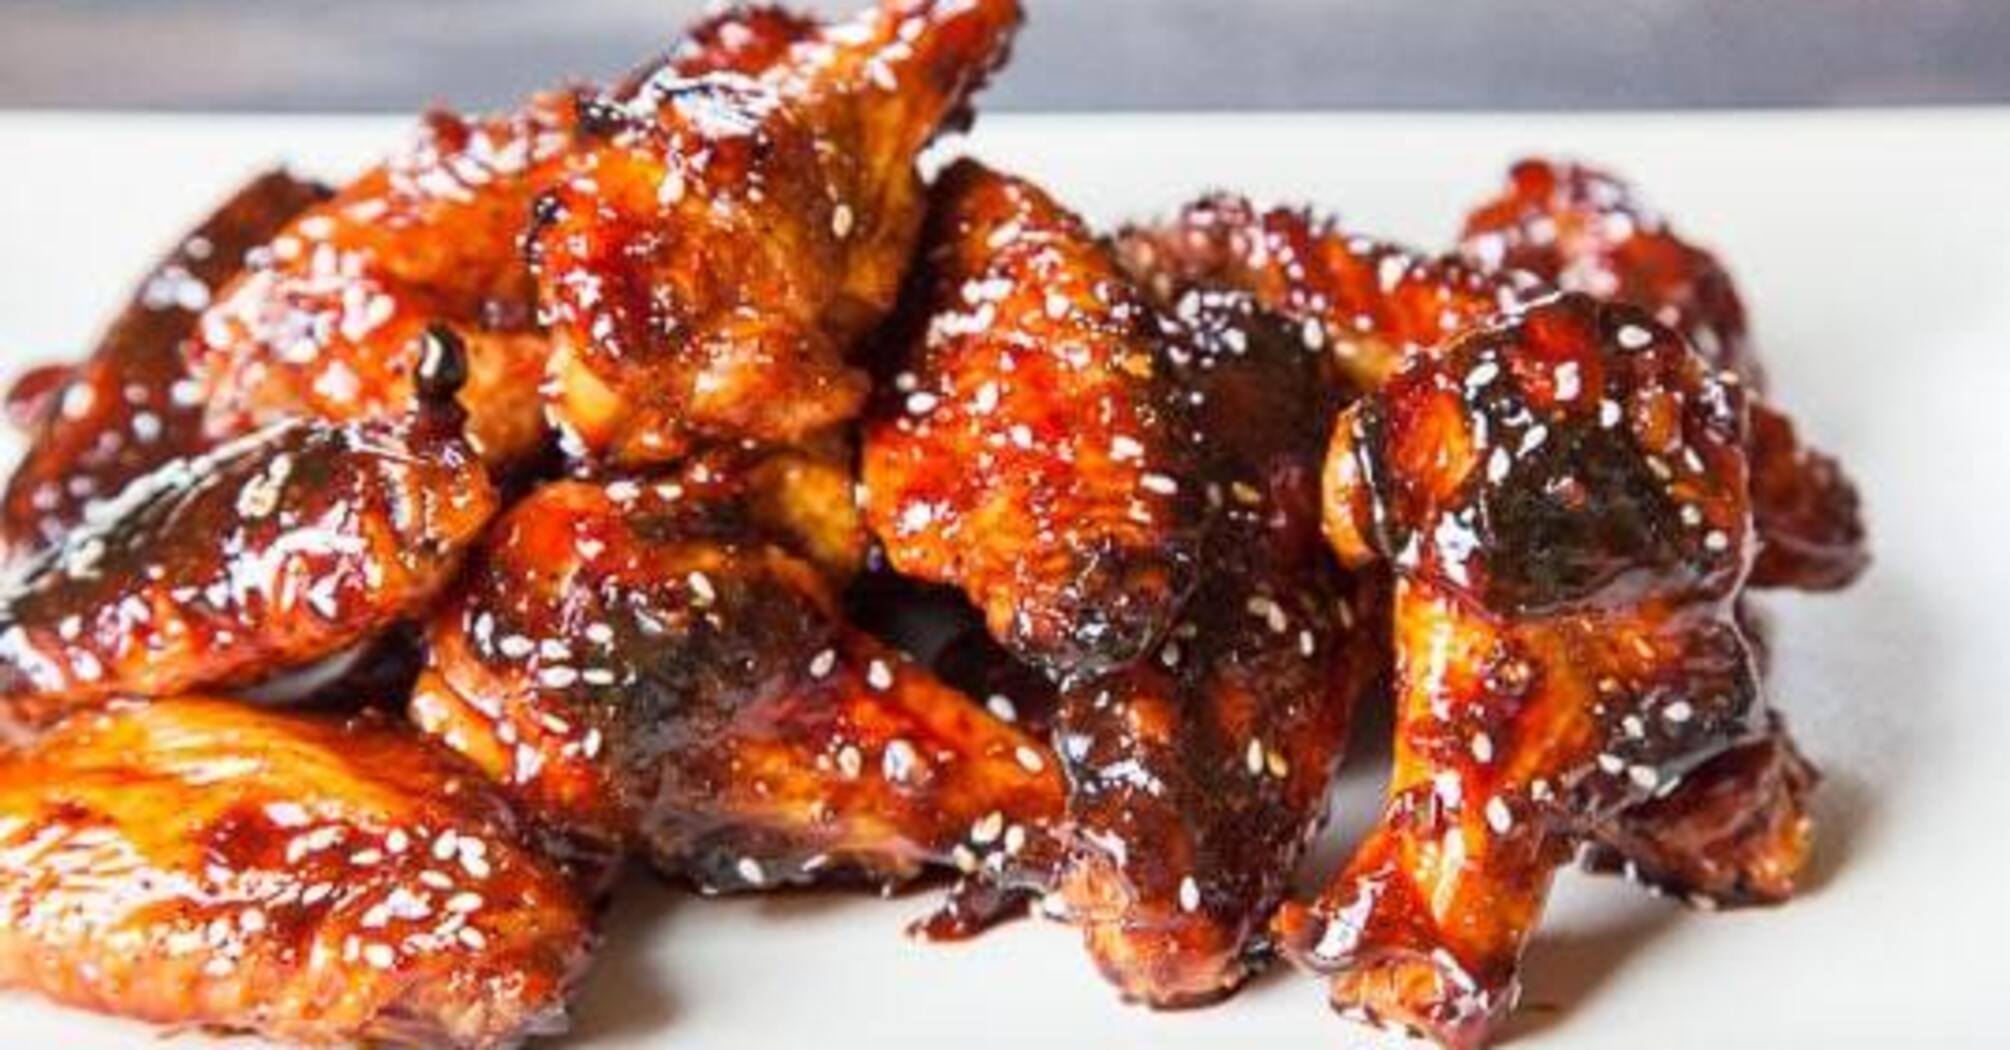 Fried wings with barbecue sauce: will be very crispy